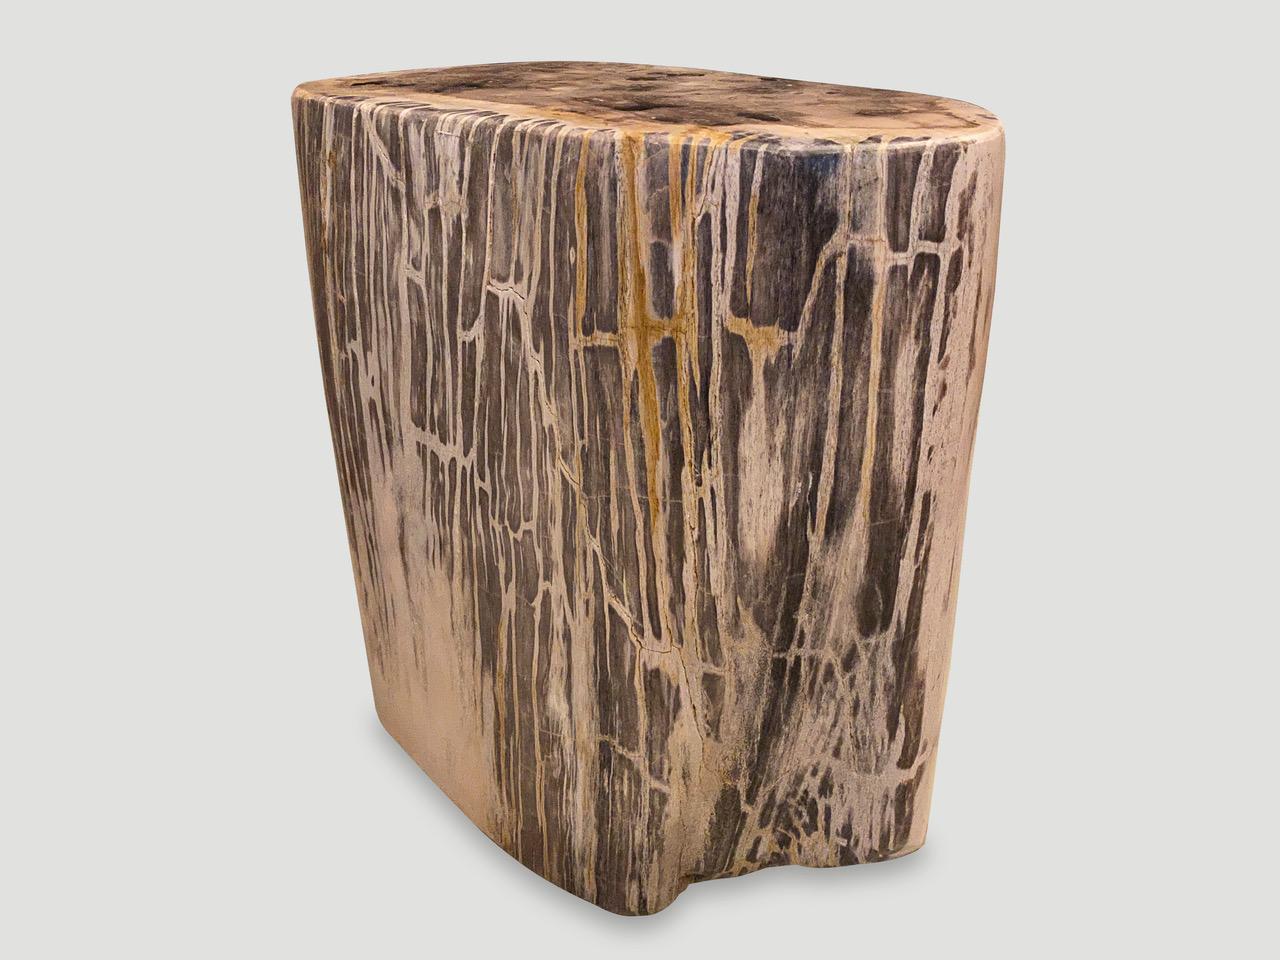 Impressive beautiful grey tones and markings on this high quality petrified wood side table. It’s fascinating how Mother Nature produces these exquisite 40 million year old petrified teak logs with such contrasting colors and natural patterns